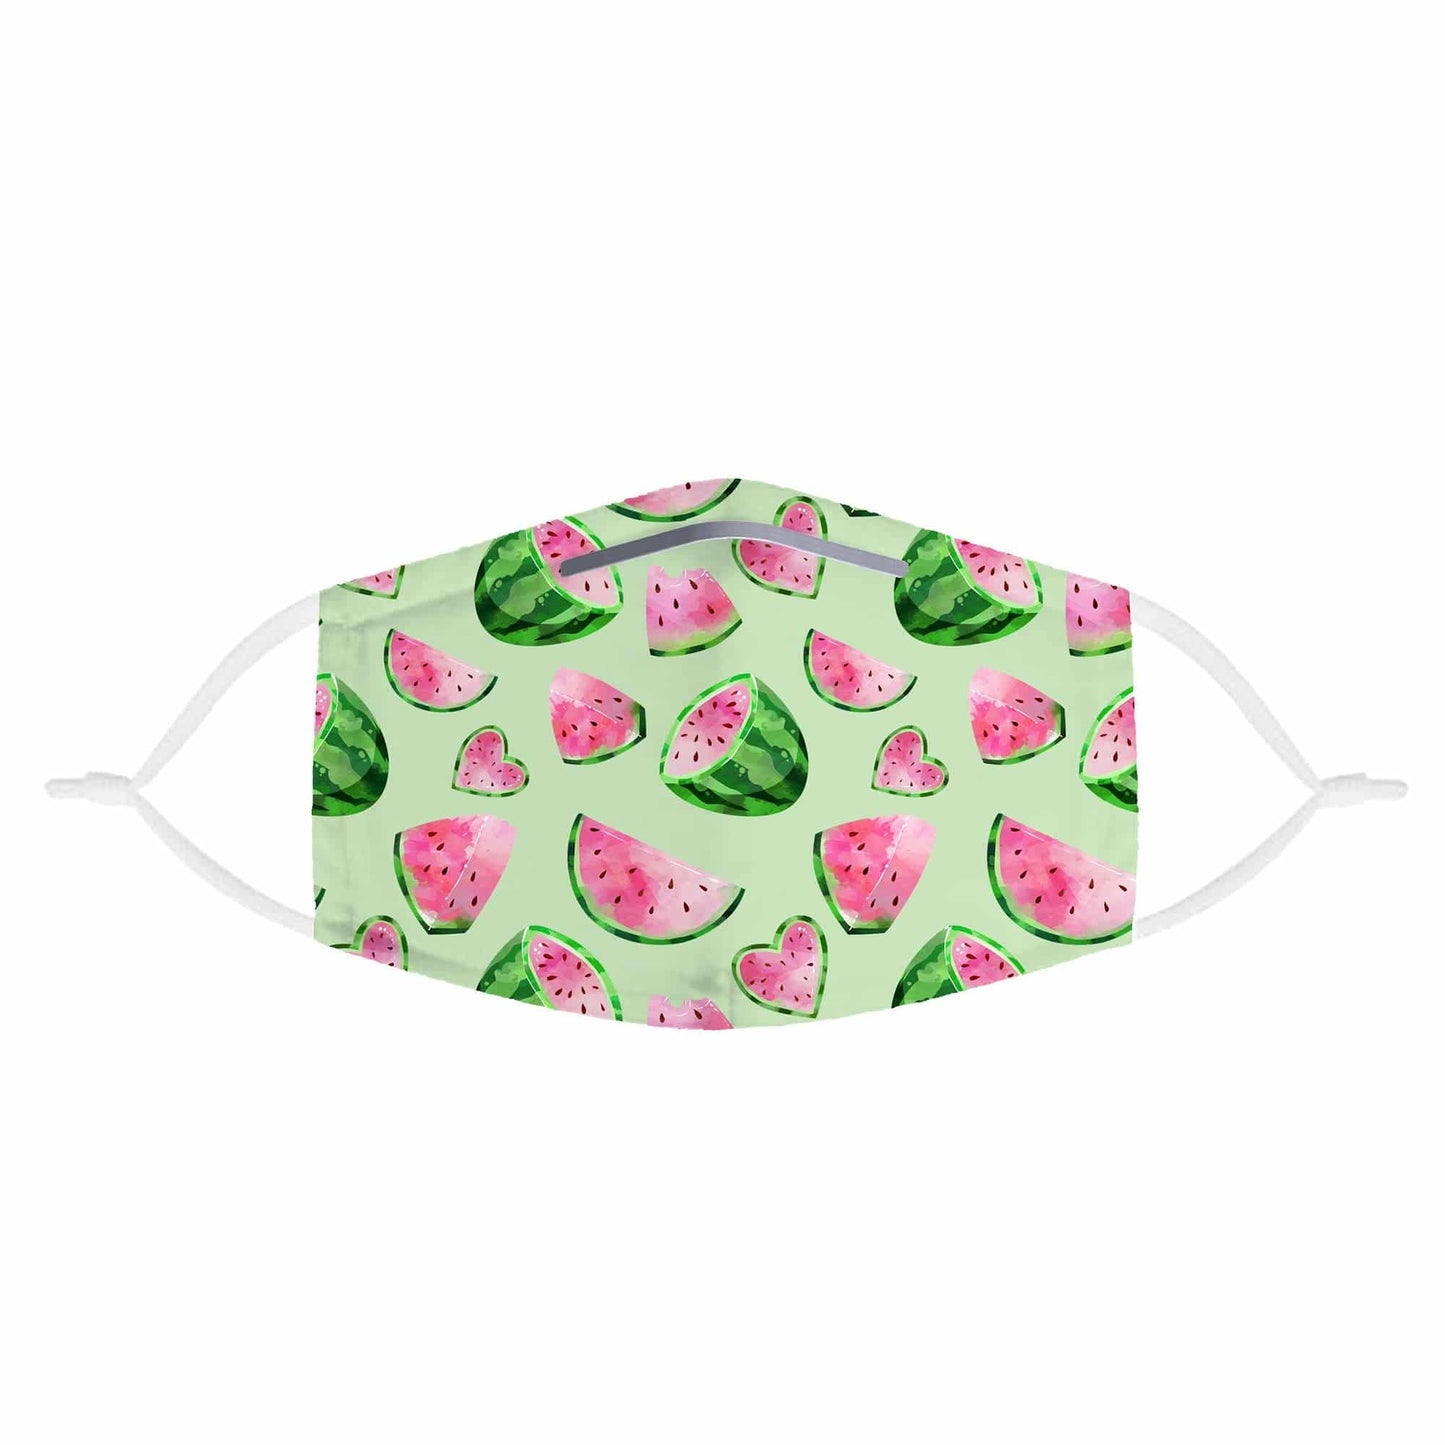 Watermelon Pattern Kids Face Mask With (4) PM 2.5 Carbon Inserts, iEDM, | iEDM